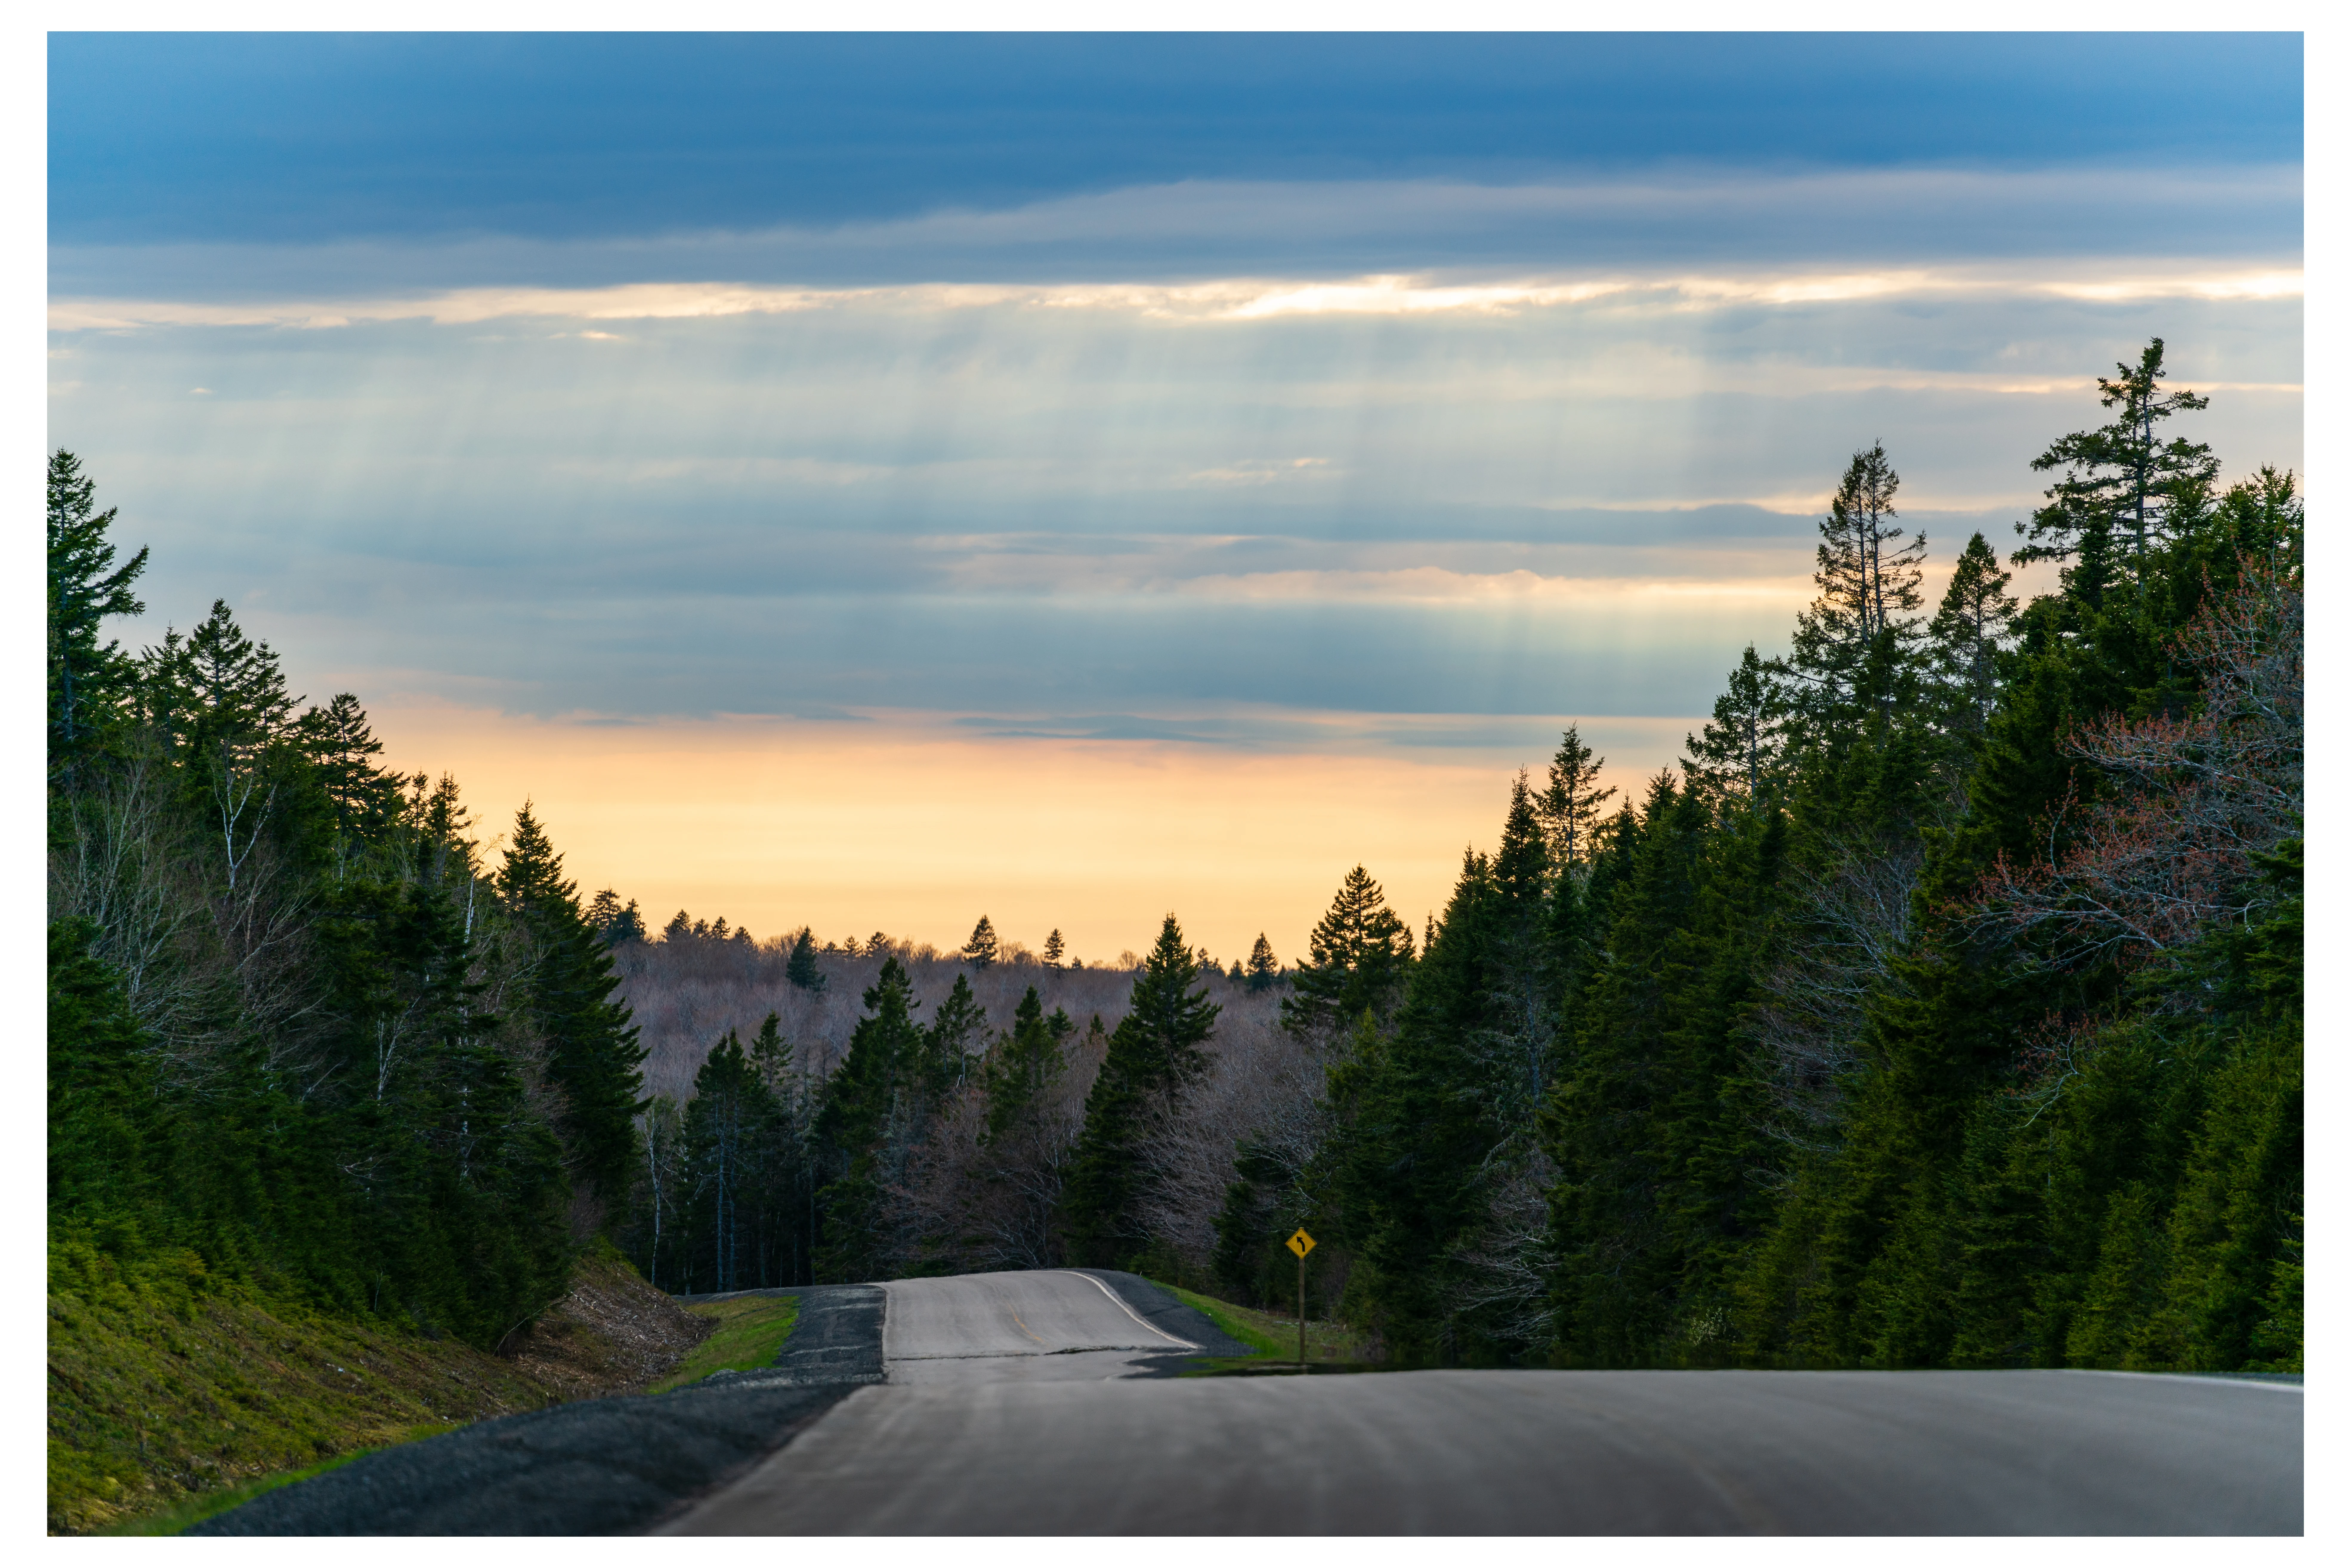 Sunset and over a moutain road, Fundy National Park